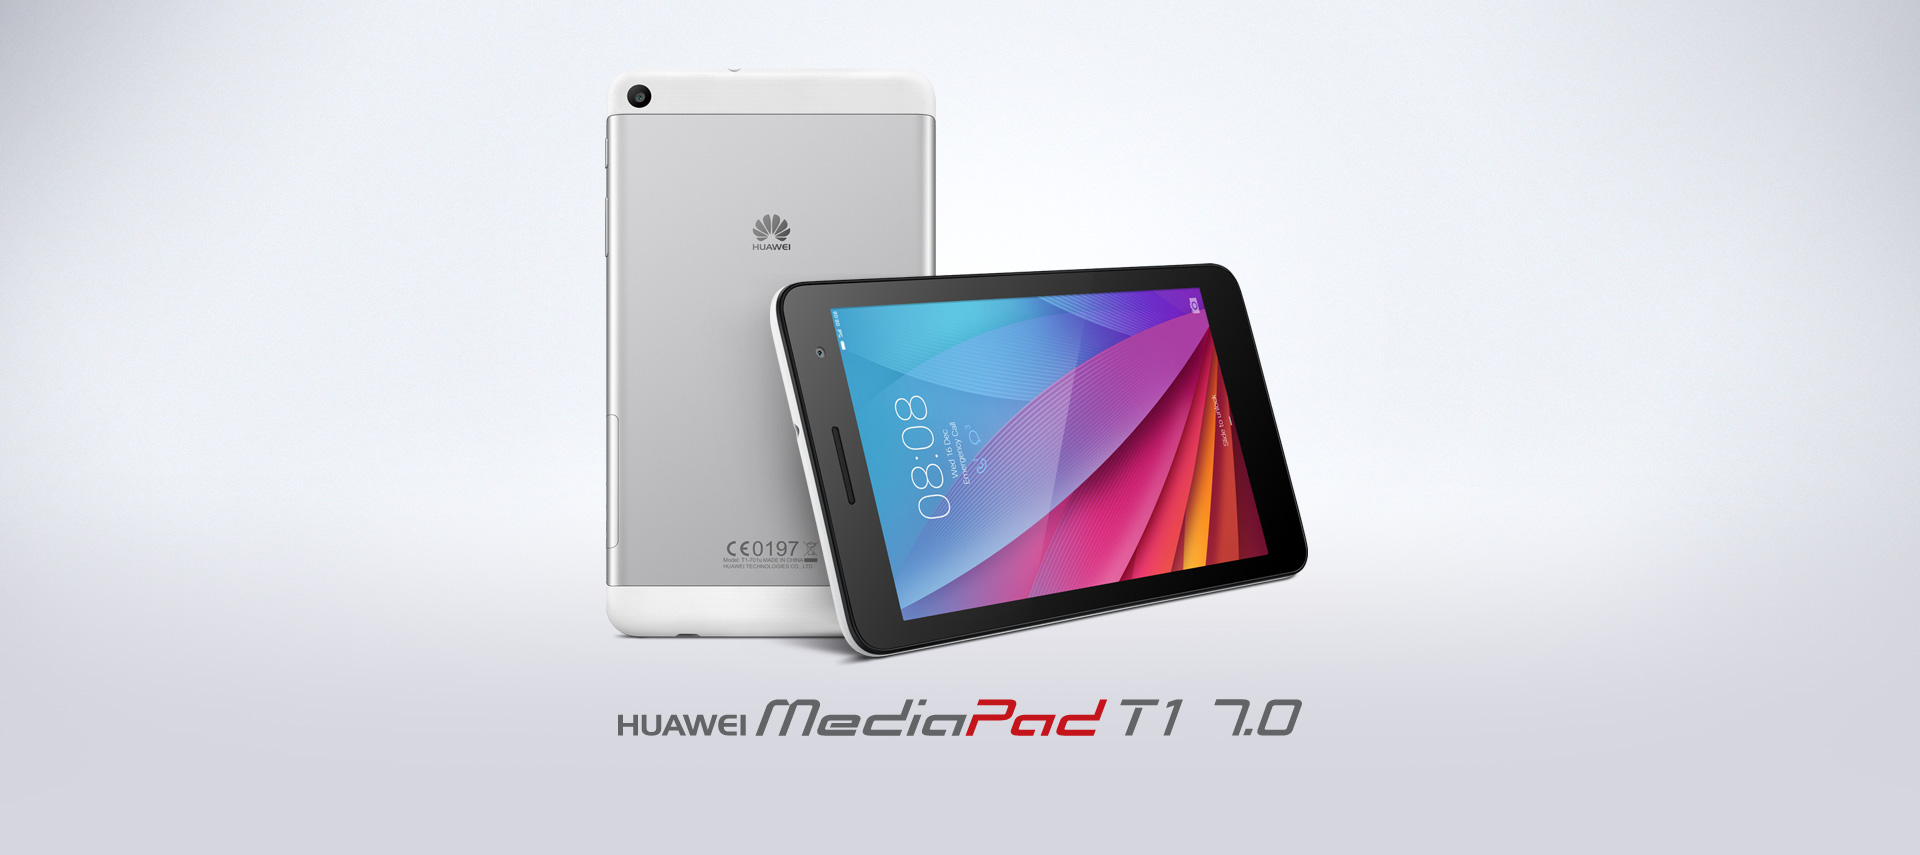 How can a Huawei tablet be unlocked?